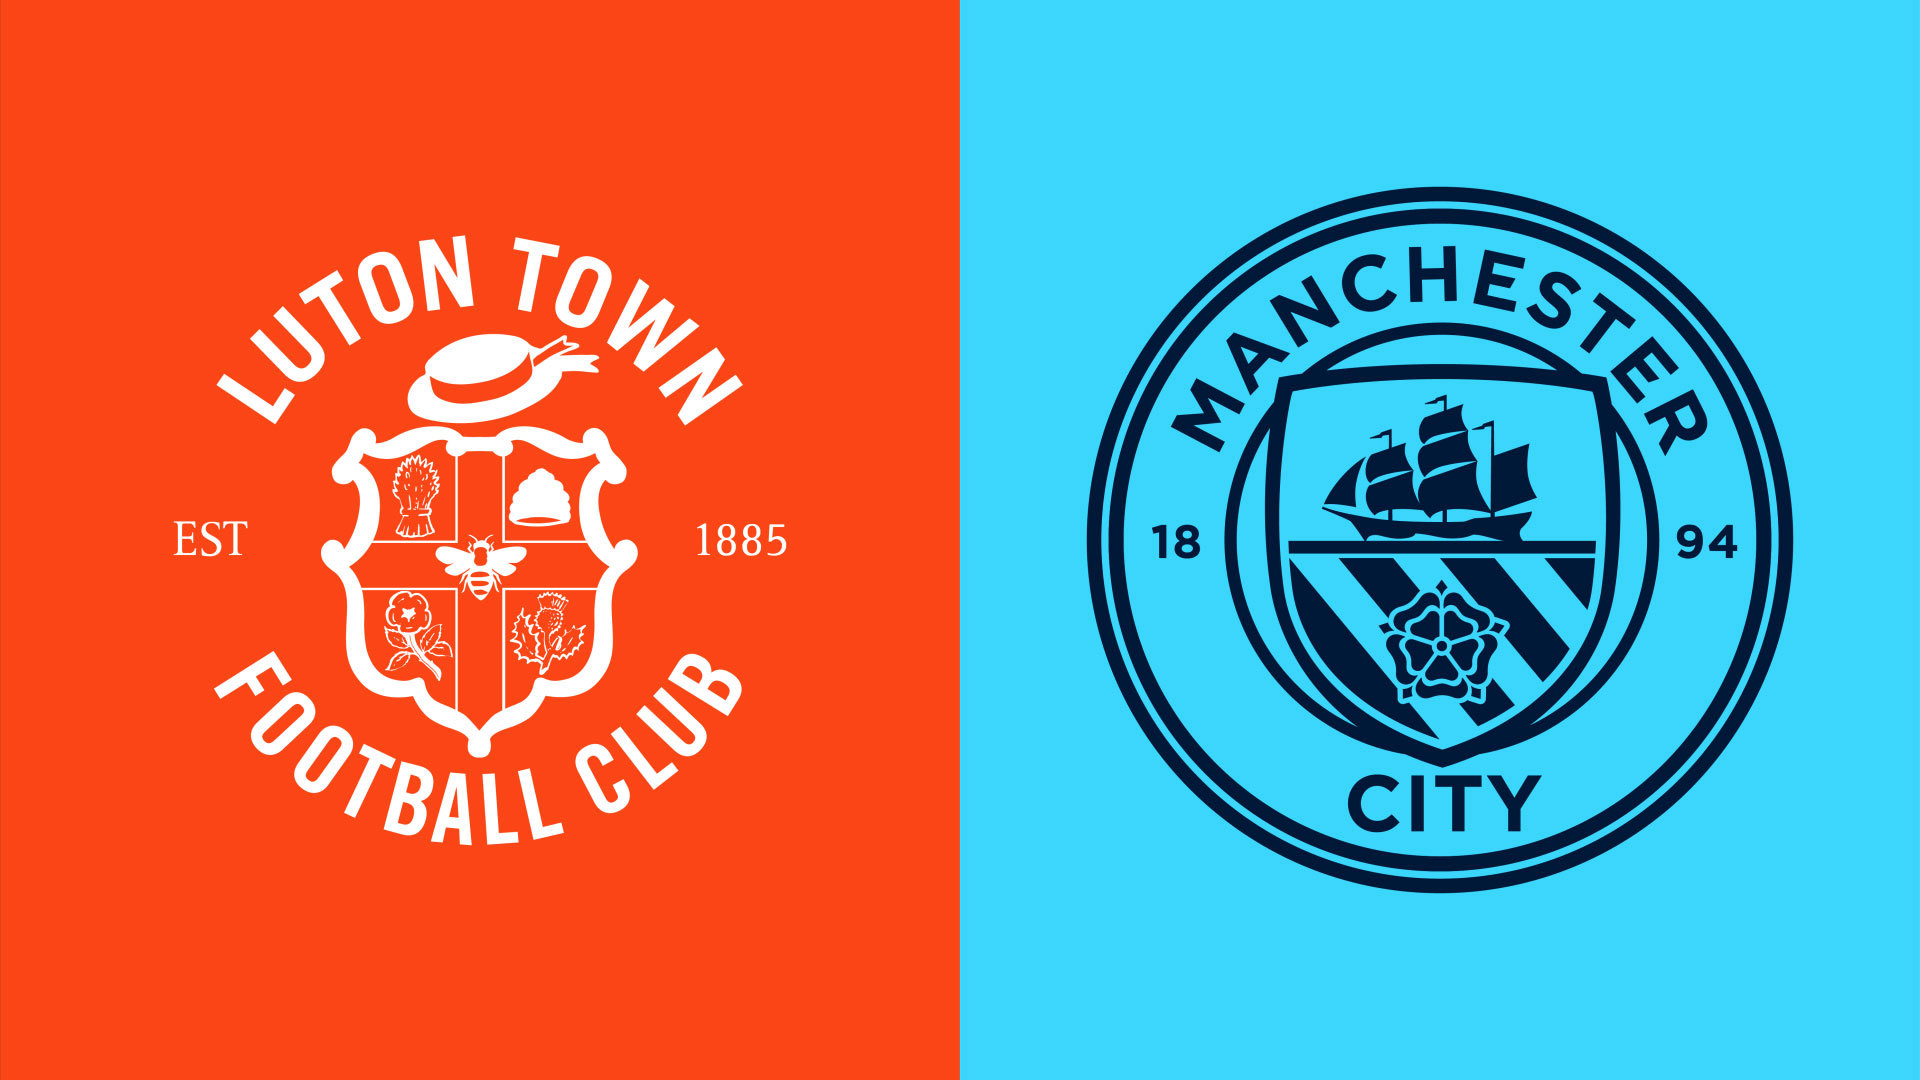 Luton Town 12 City Match stats and reaction